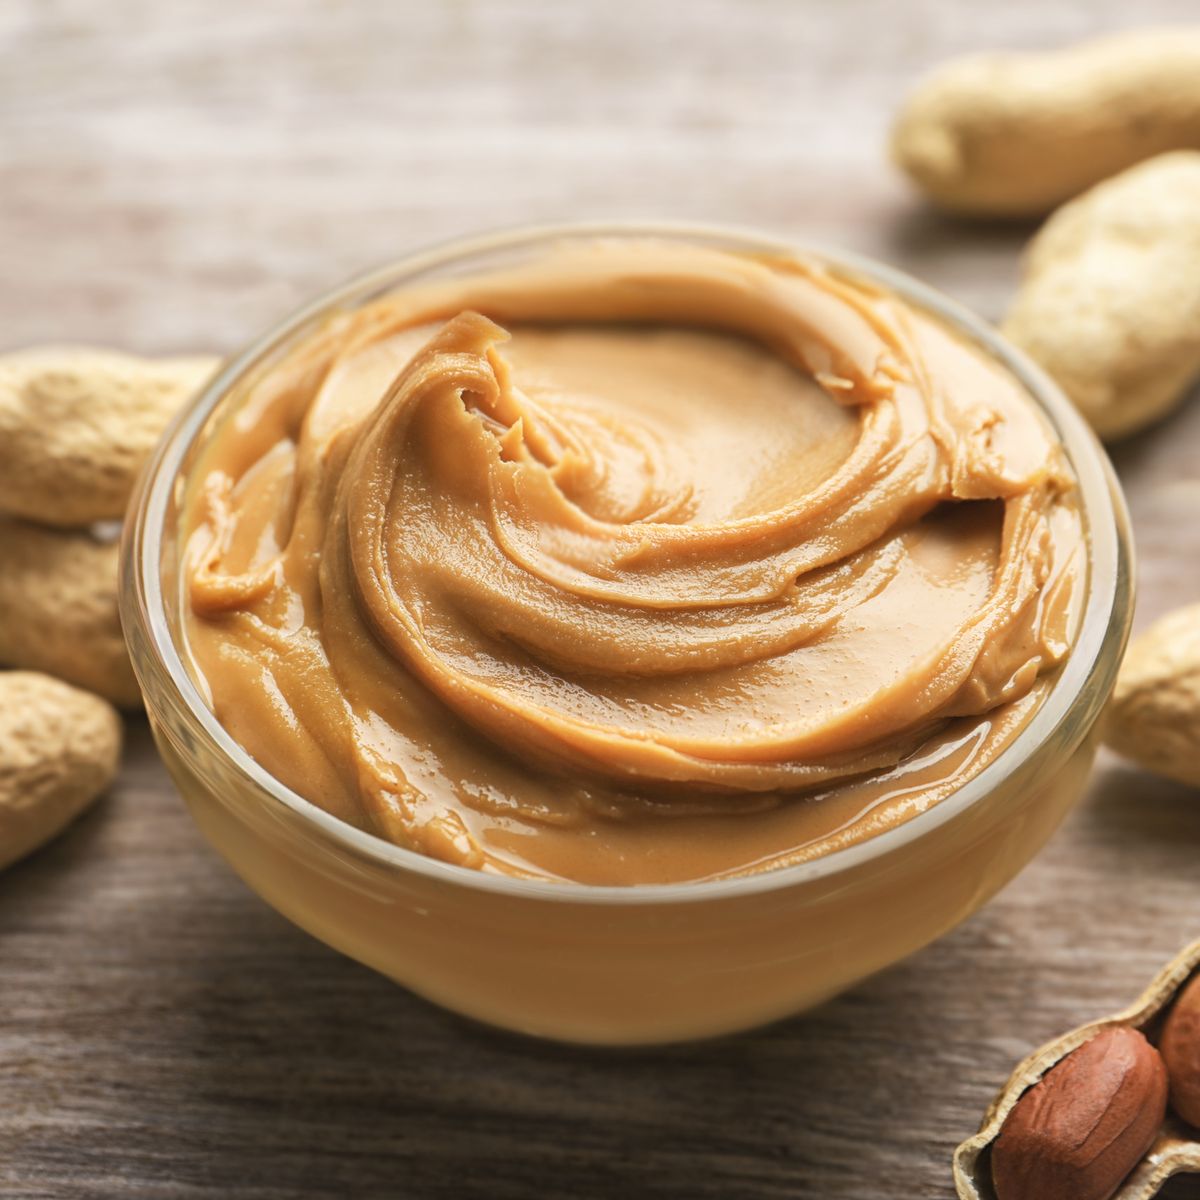 Peanut Butter Making Business Plan in Tamil